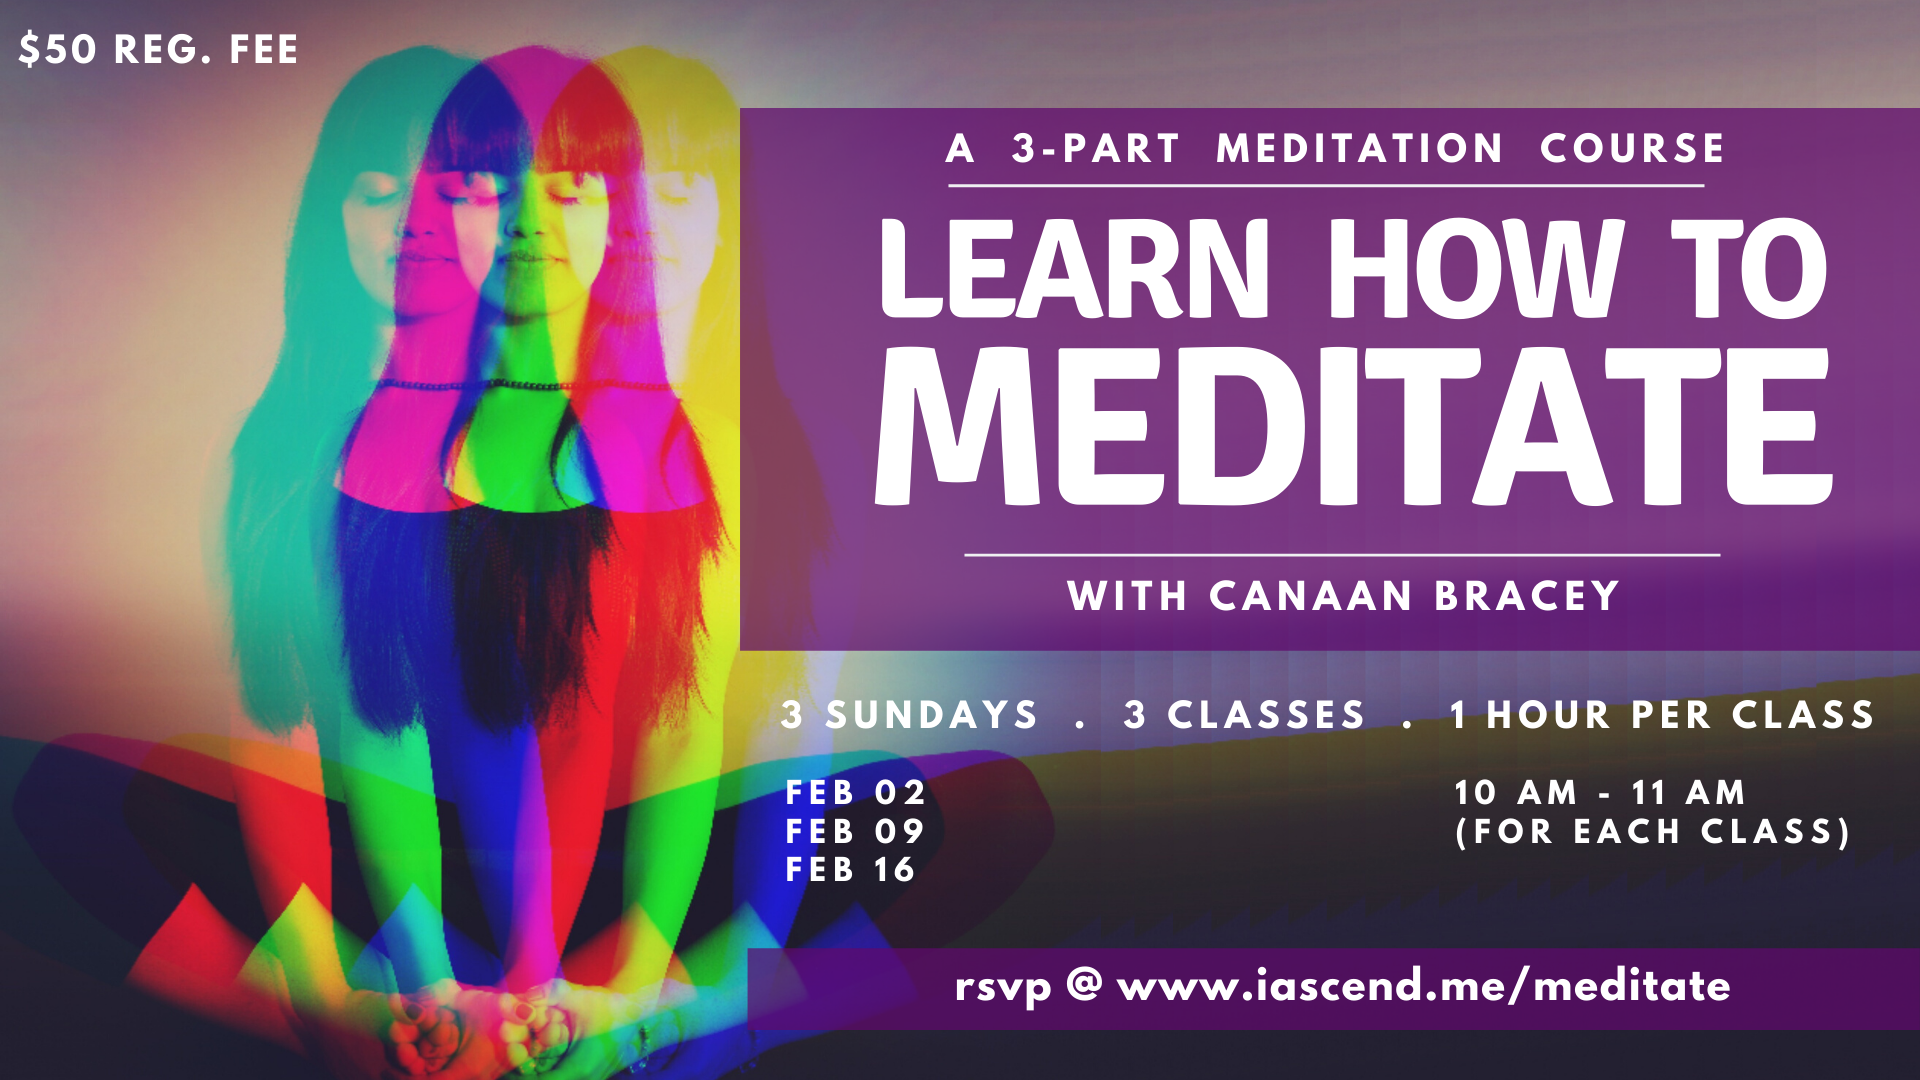 Learn how to Meditate ( A 3-Part Course) with Canaan Bracey